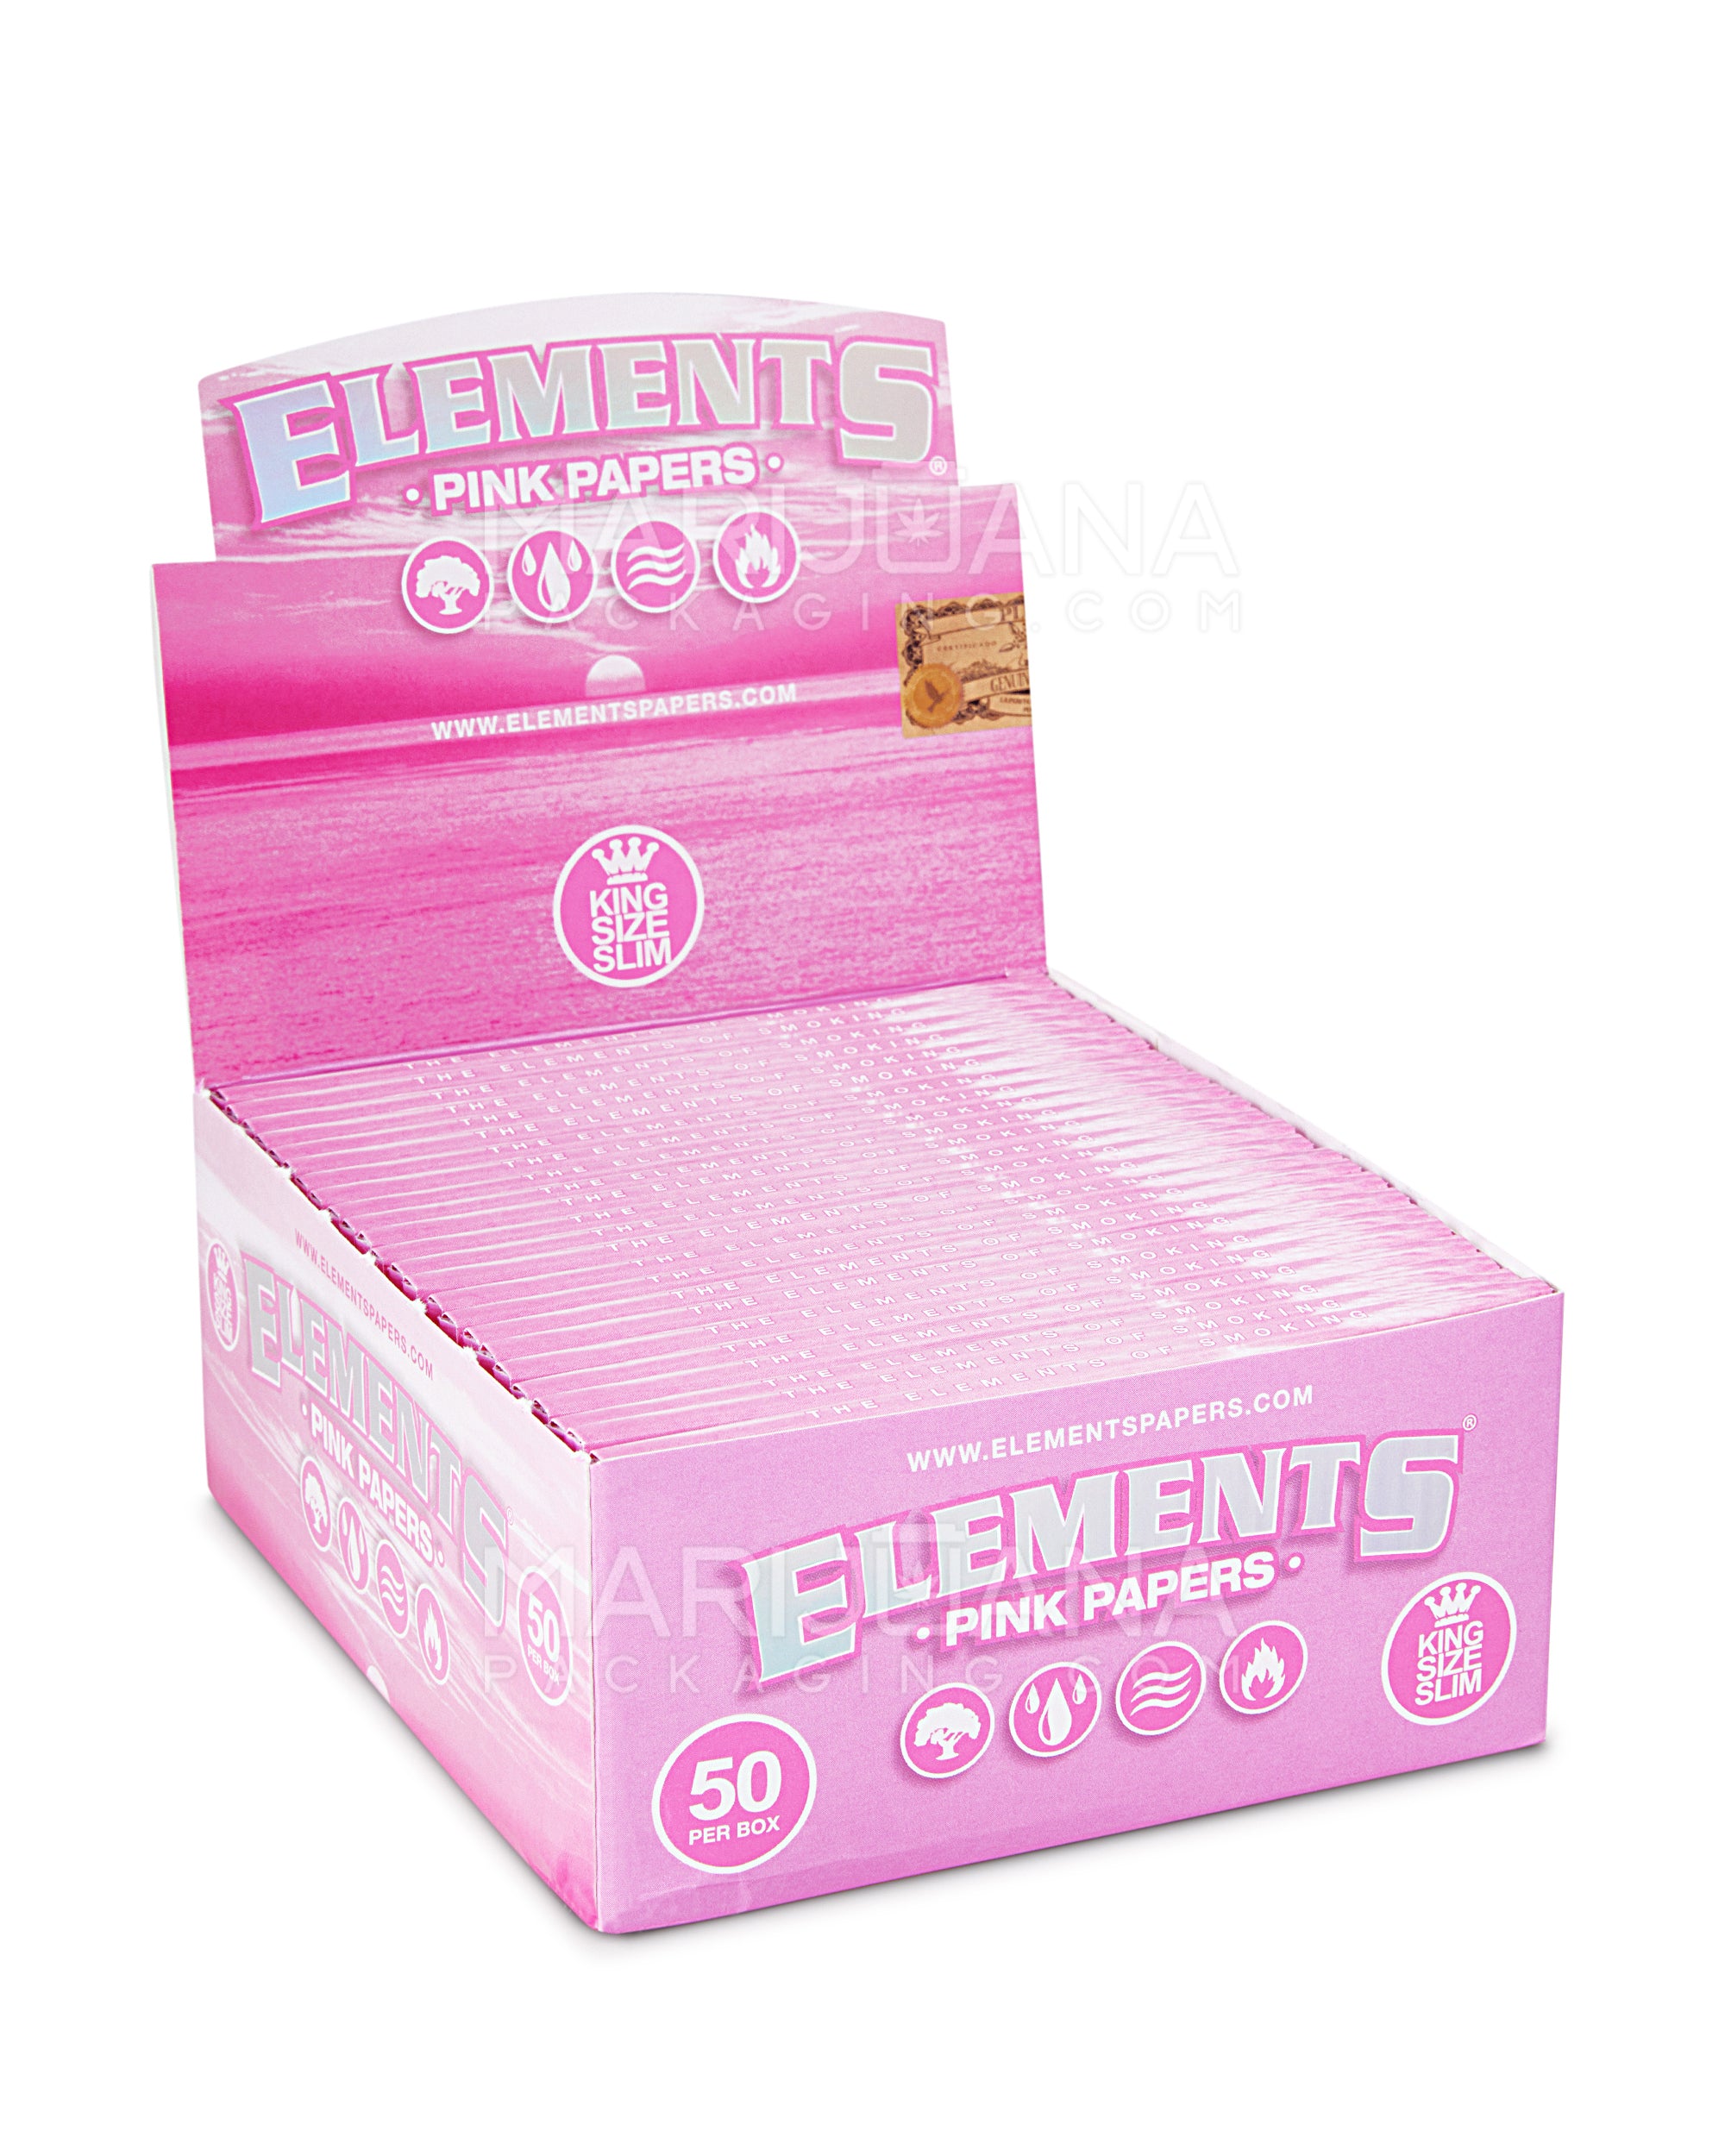 ELEMENTS | 'Retail Display' King Size Slim Ultra Thin Rolling Papers | 116mm - Pink Rice Paper - 50 Count - 1